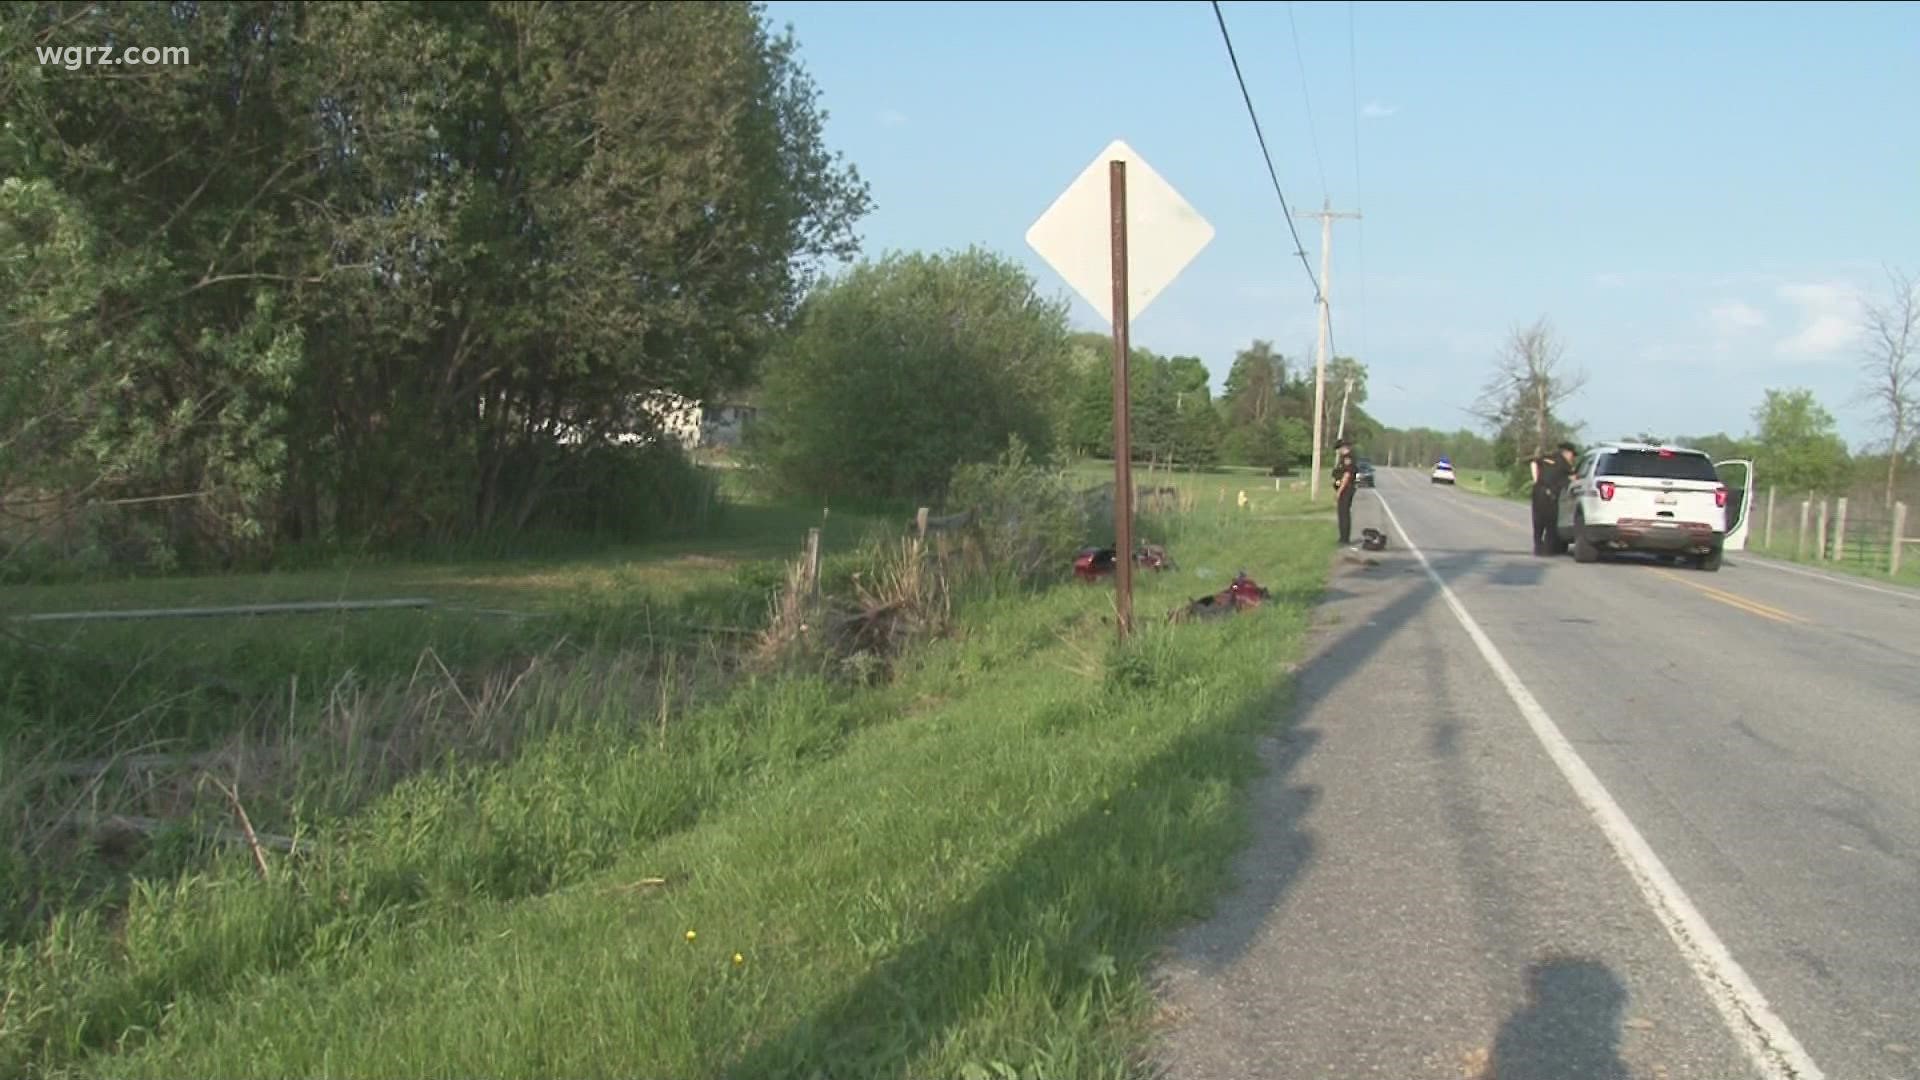 A 60-year-old Hilton man died this afternoon after crashing his motorcycle on north Byron Road in Genesee county.